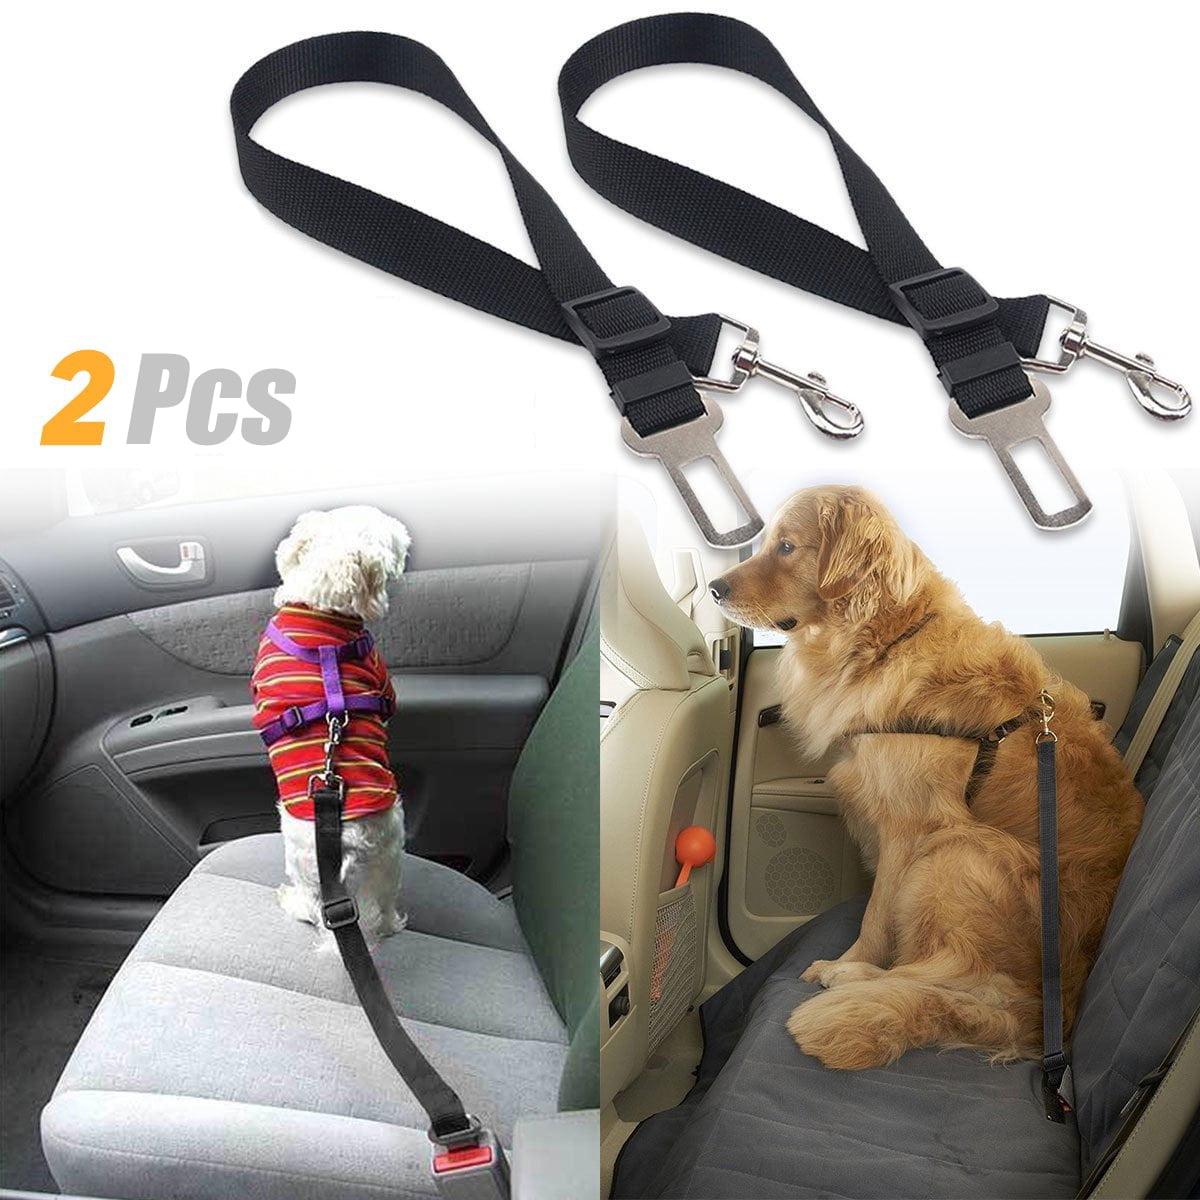 Pet Cat Dog SeatBelt Harness Adjustable Length Strong Dog Car Seat Belt Clip for Travel Safety Medium Fit Small Large Dogs Dog Seat Belt for Car Elastic Anti Shock Buffer Nylon Bungee Lead